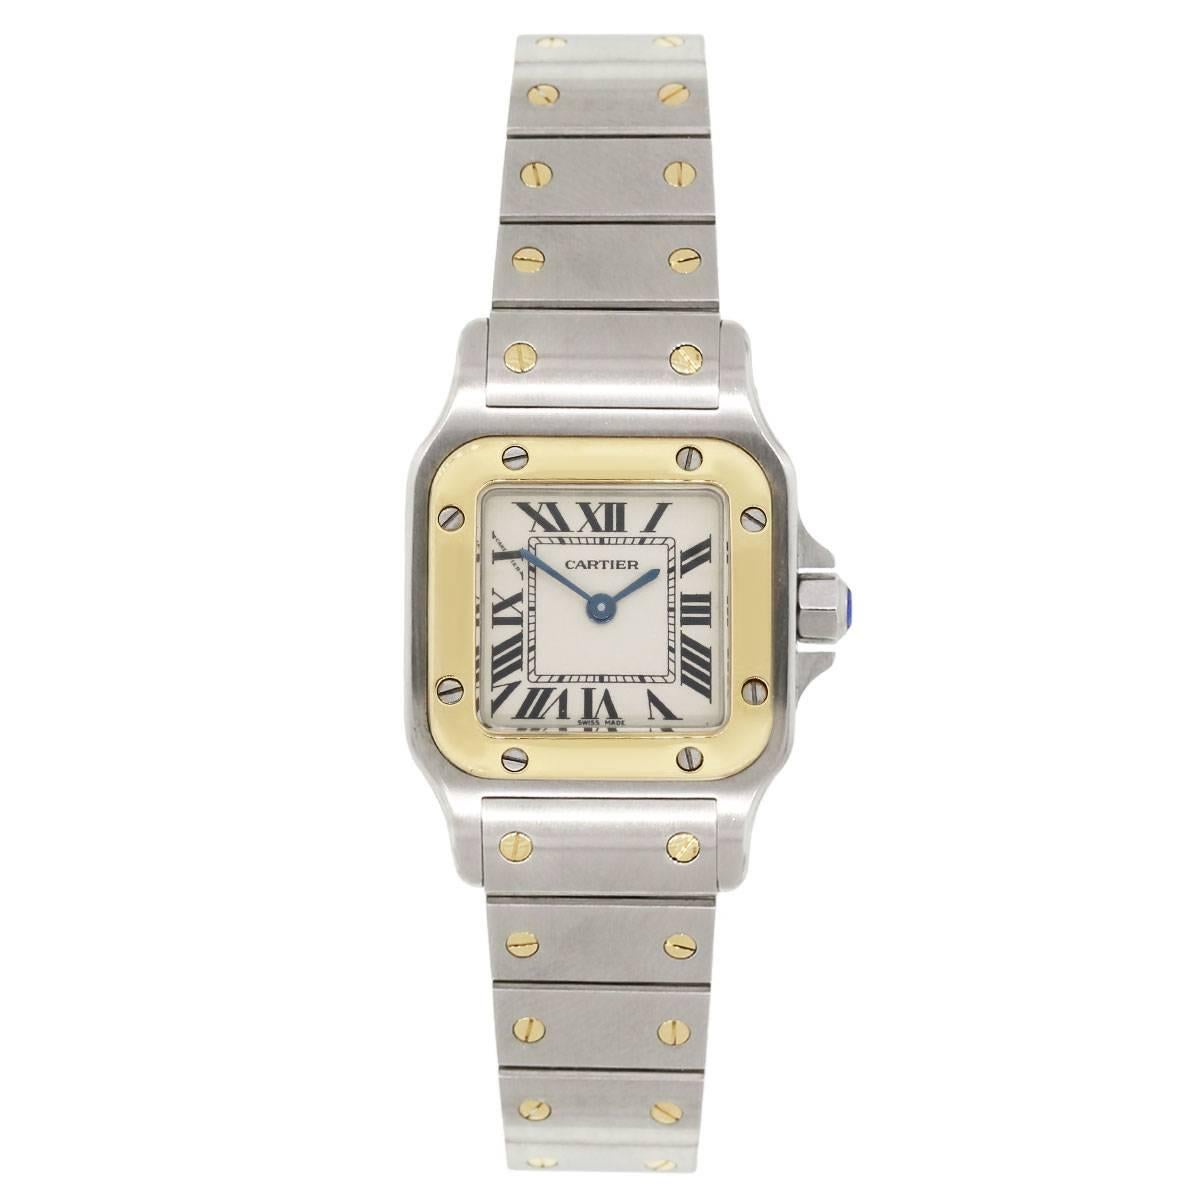 Brand: Cartier
MPN: 1567
Model: Santos Galbee
Case Material: Stainless steel
Case Diameter: 24mm
Crystal: Scratch resistant sapphire
Bezel: 18k yellow gold
Dial: White roman dial
Bracelet: Stainless steel and 18k yellow gold screws
Size: Will fit a